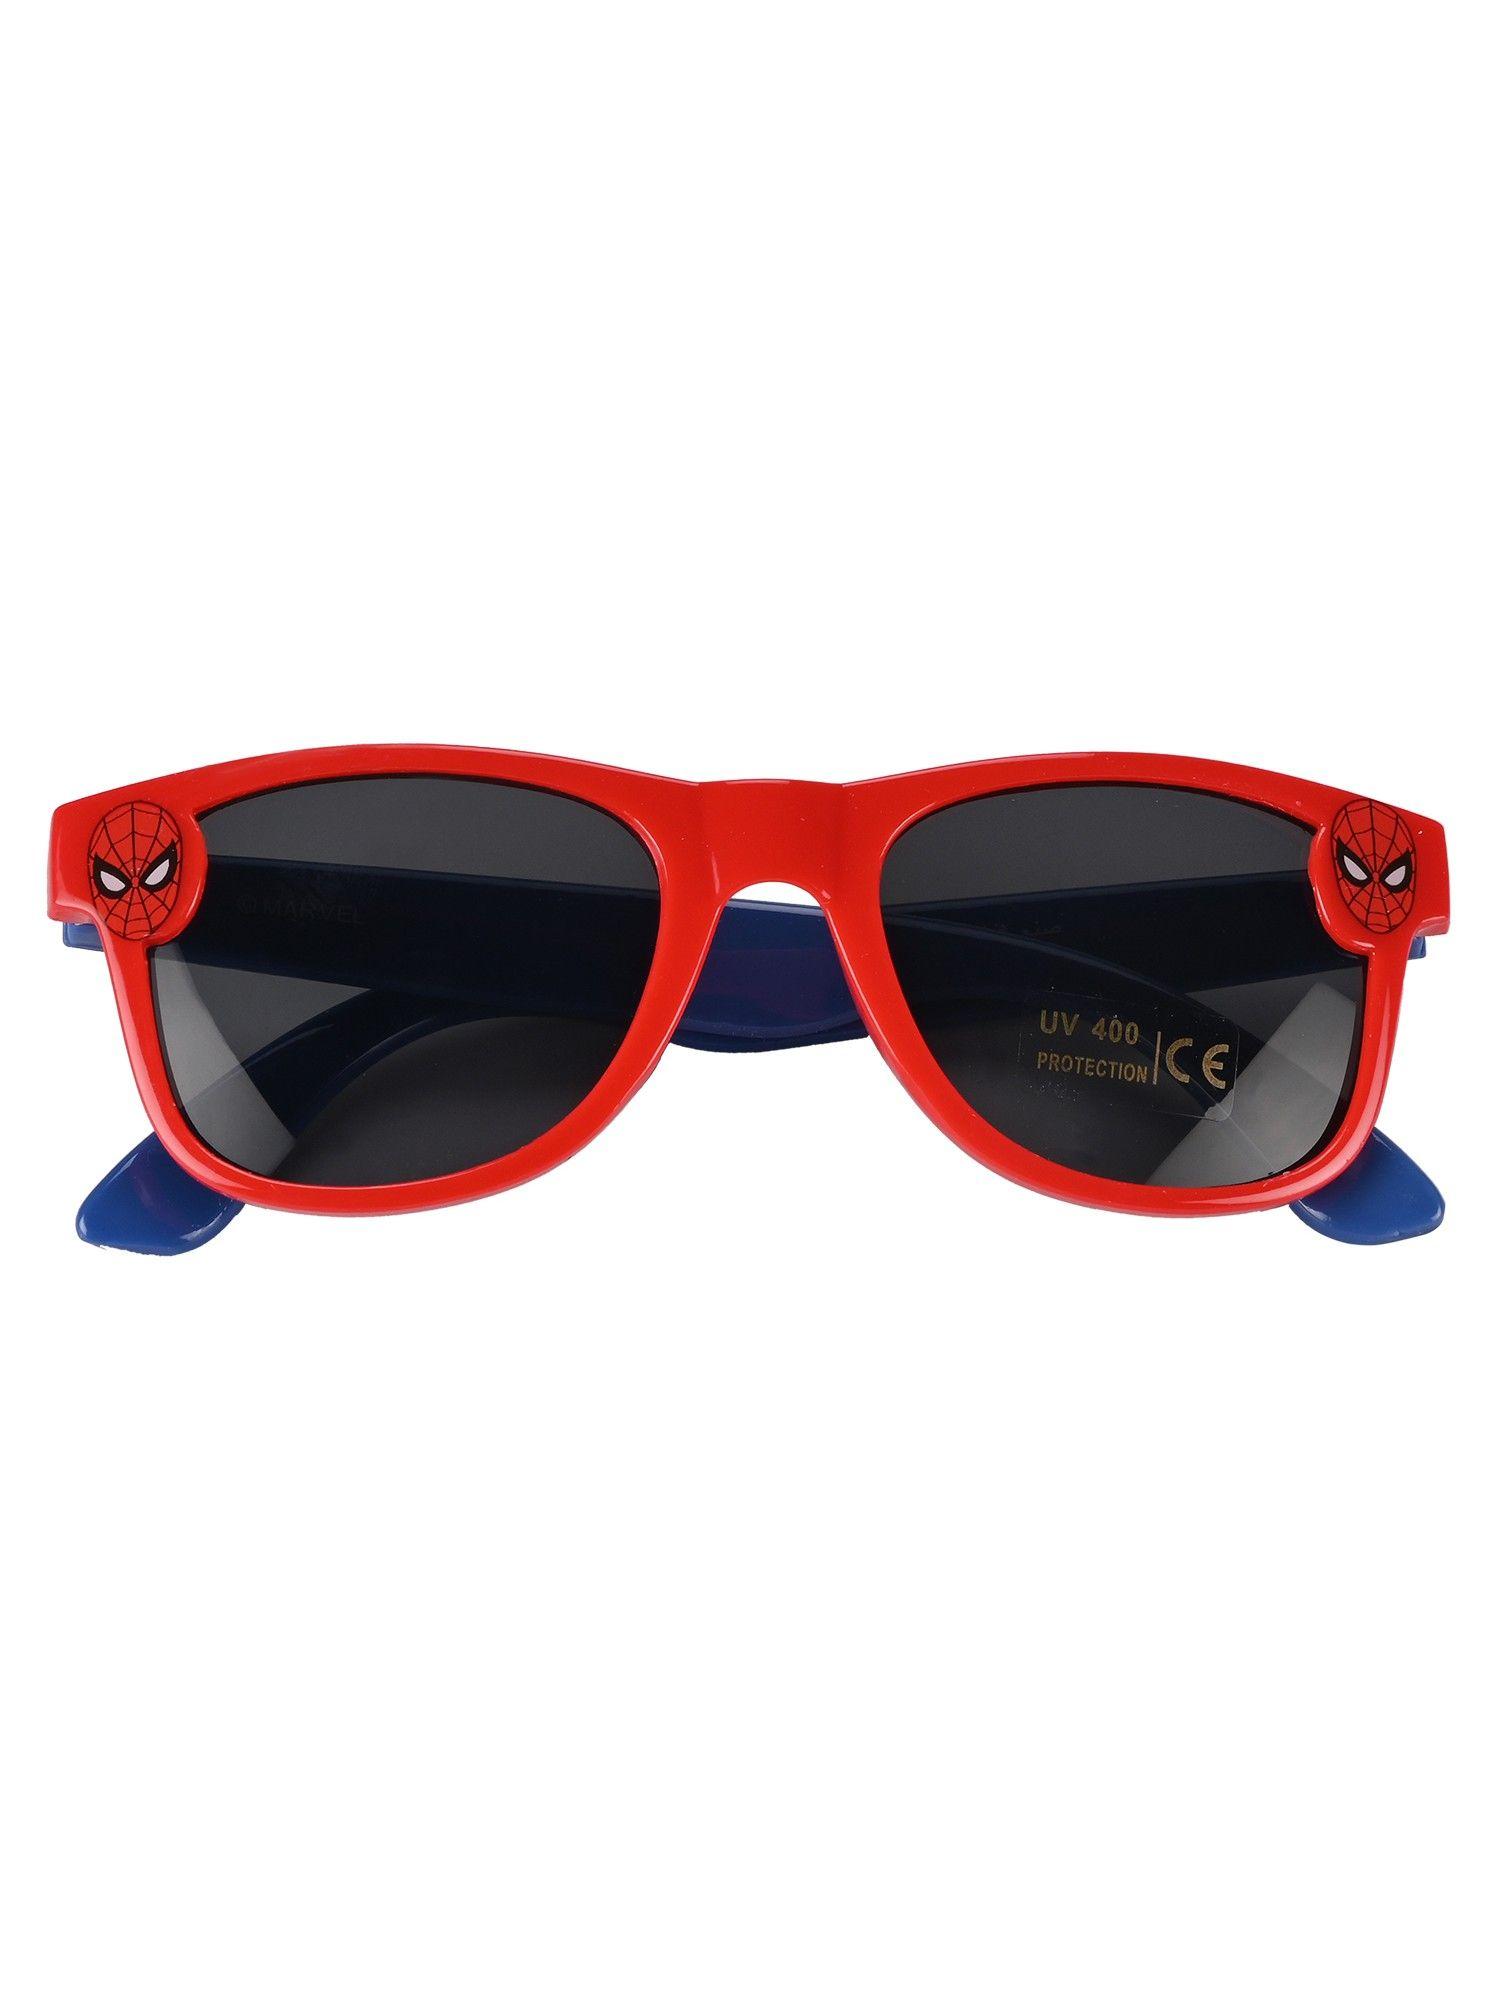 kids-spiderman-sunglasses-with-pouch